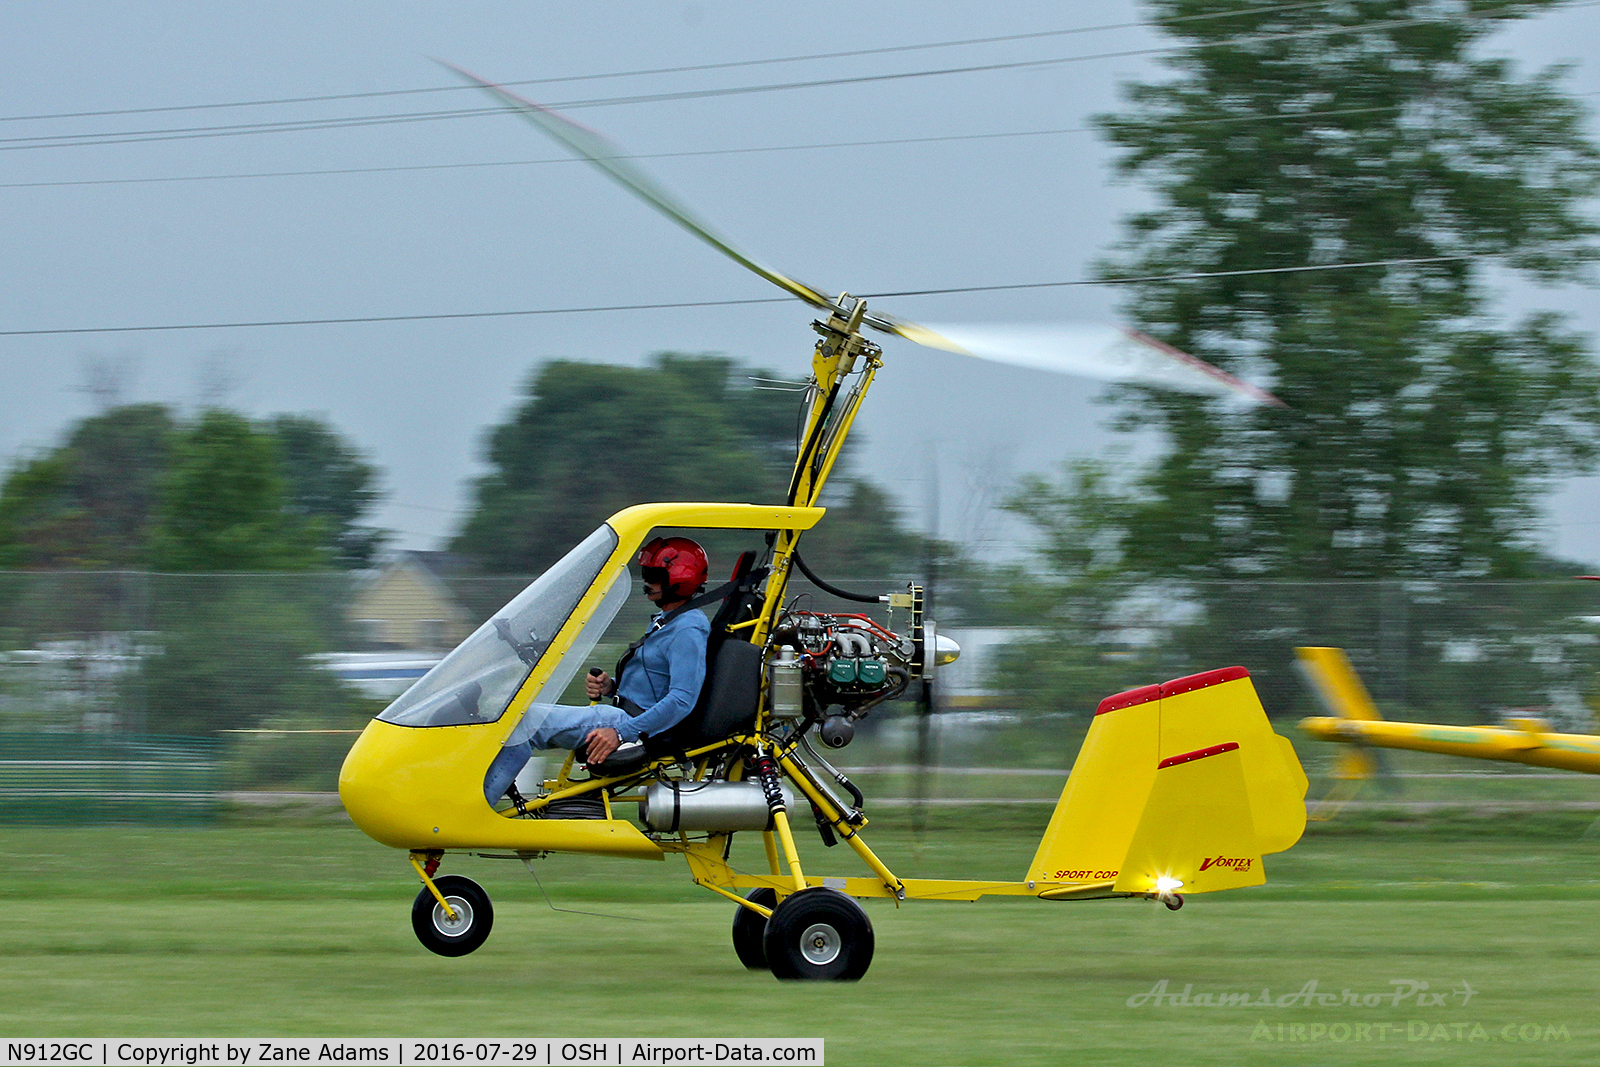 N912GC, 2015 Sport Copter M912 C/N 177, At the 2016 EAA AirVenture - Oshkosh, Wisconsin